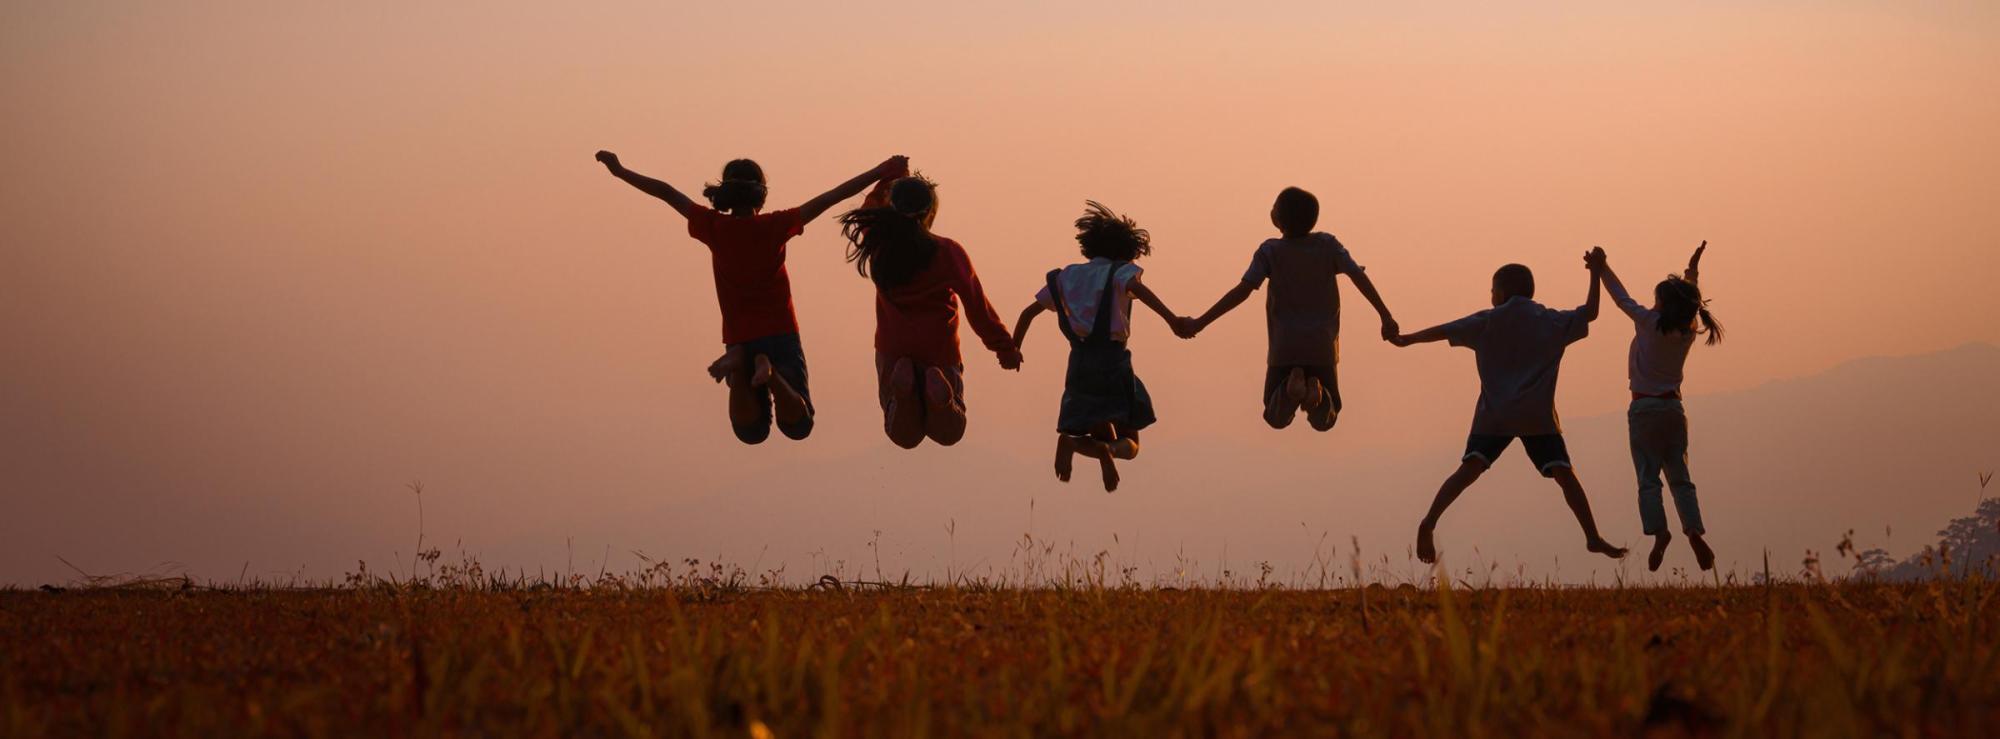 kids jumping in sunset